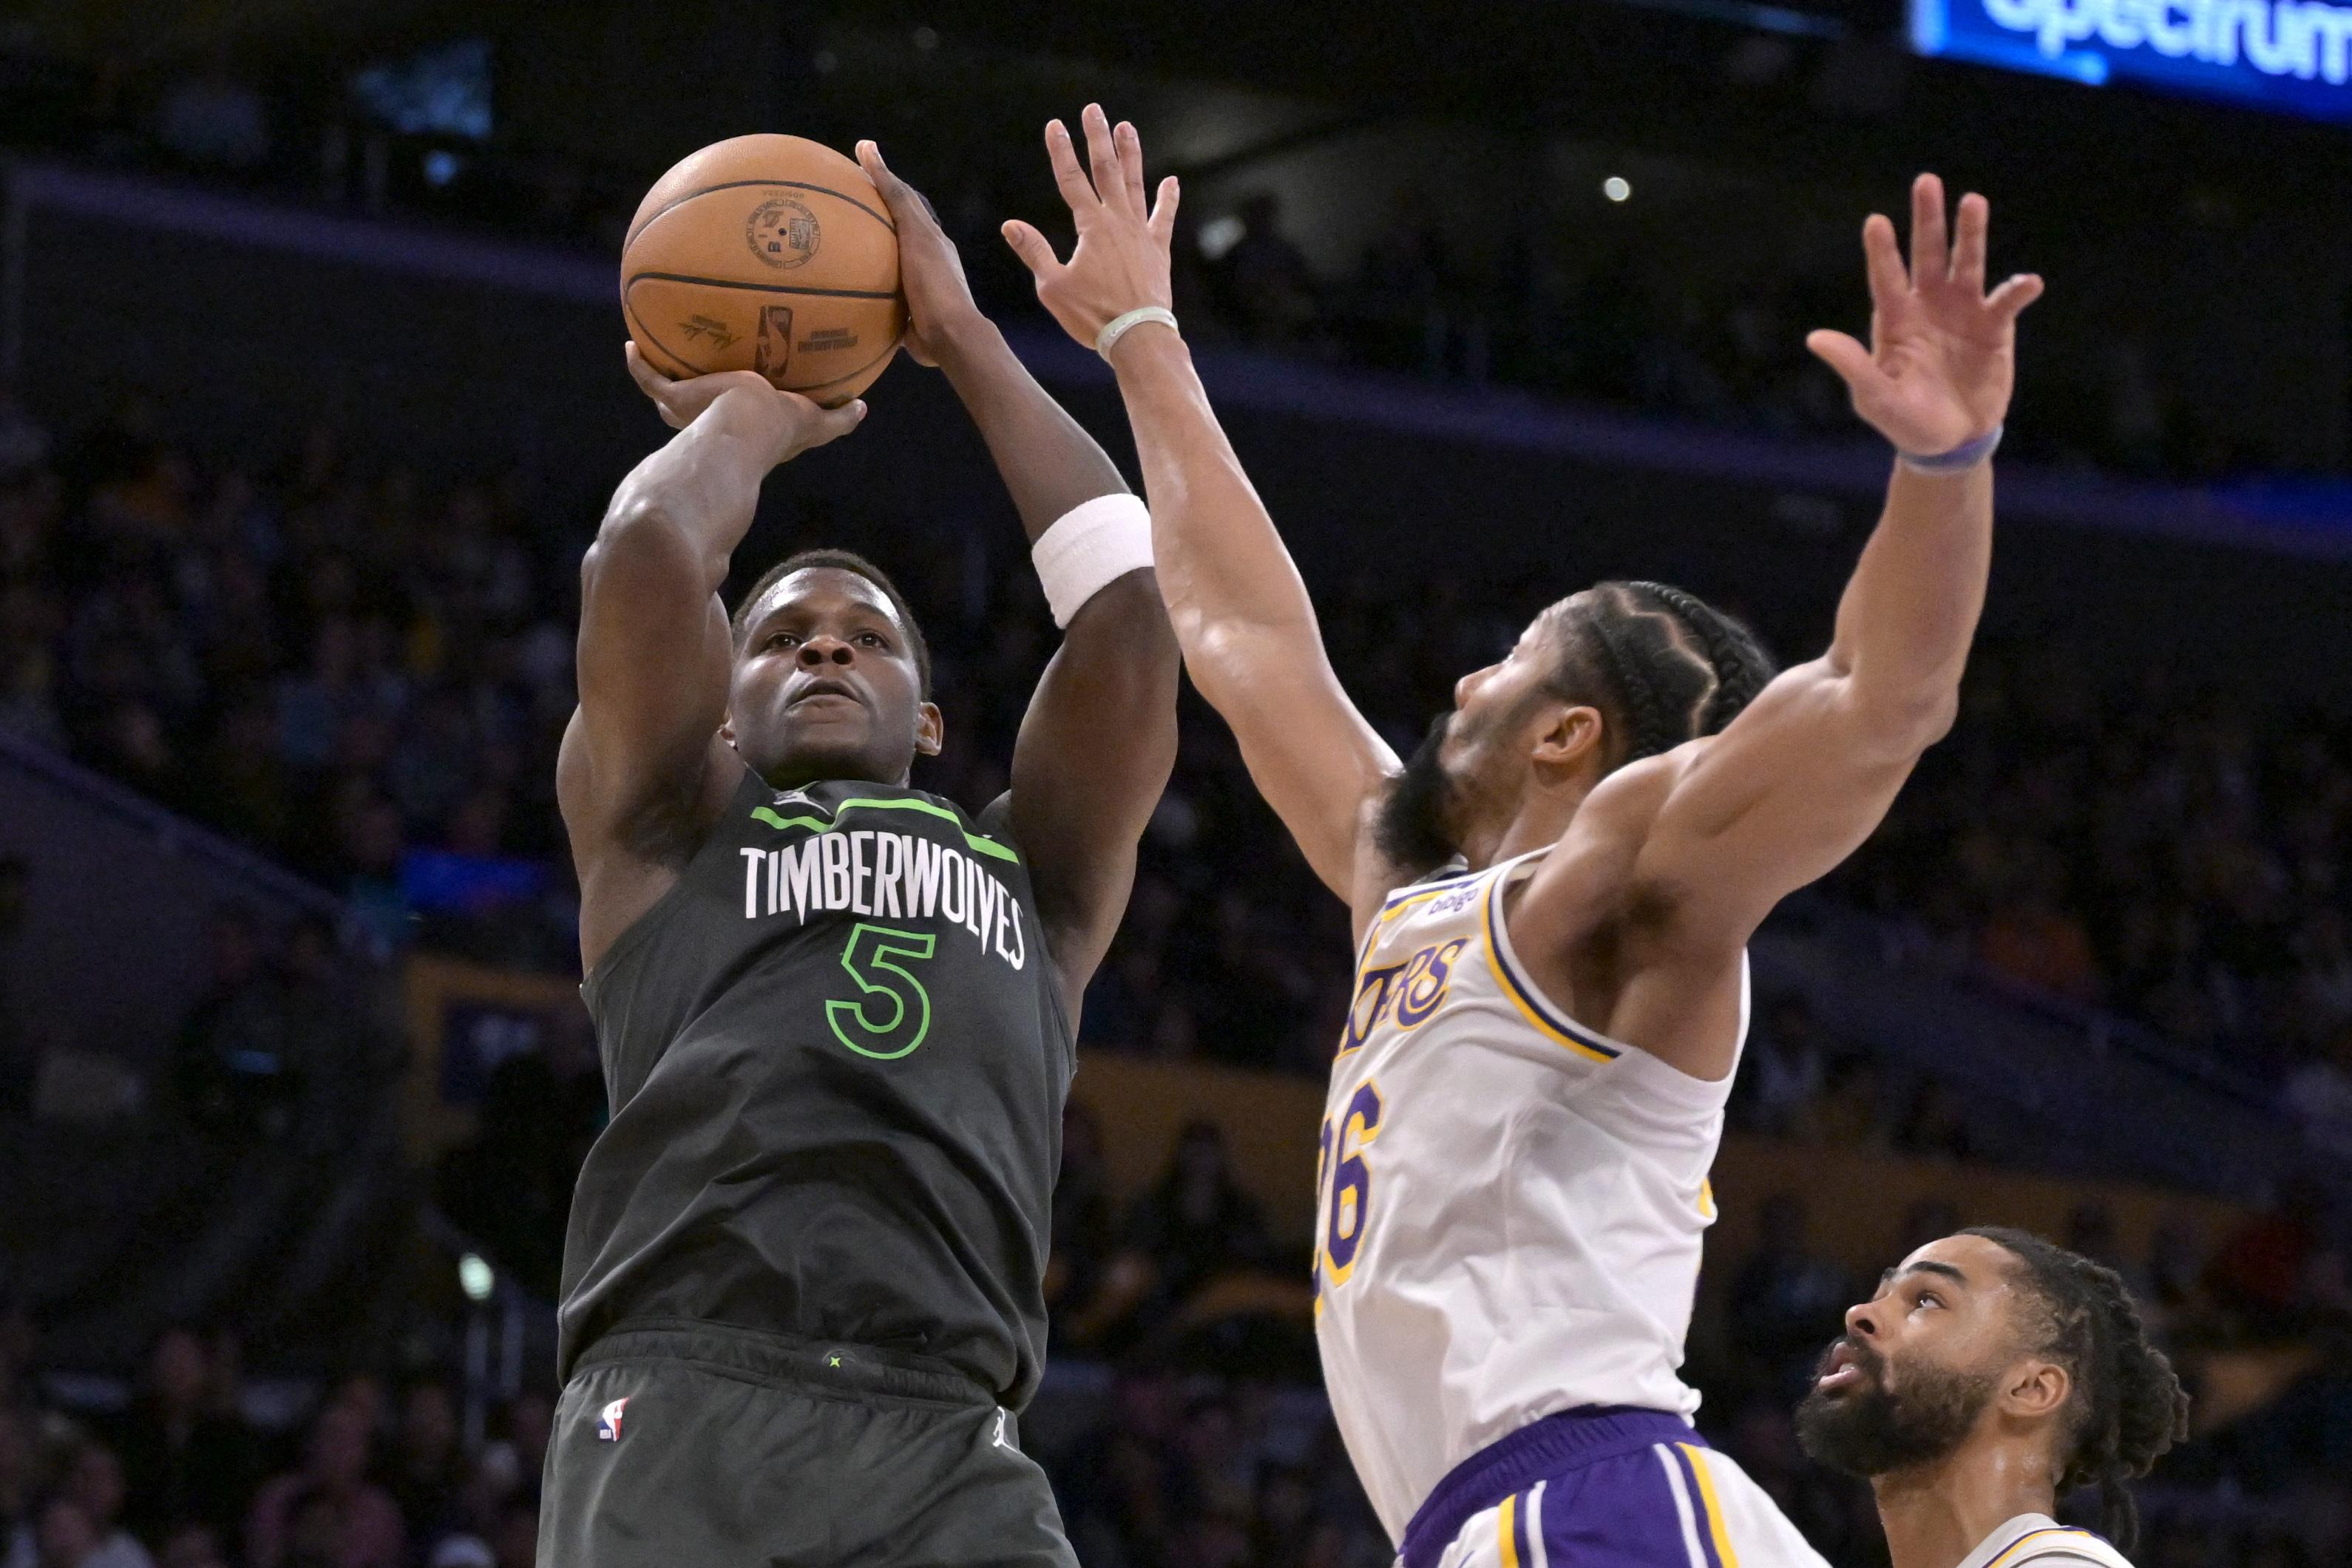 NBA: Wolves rise to No. 1 spot in West with win over Lakers